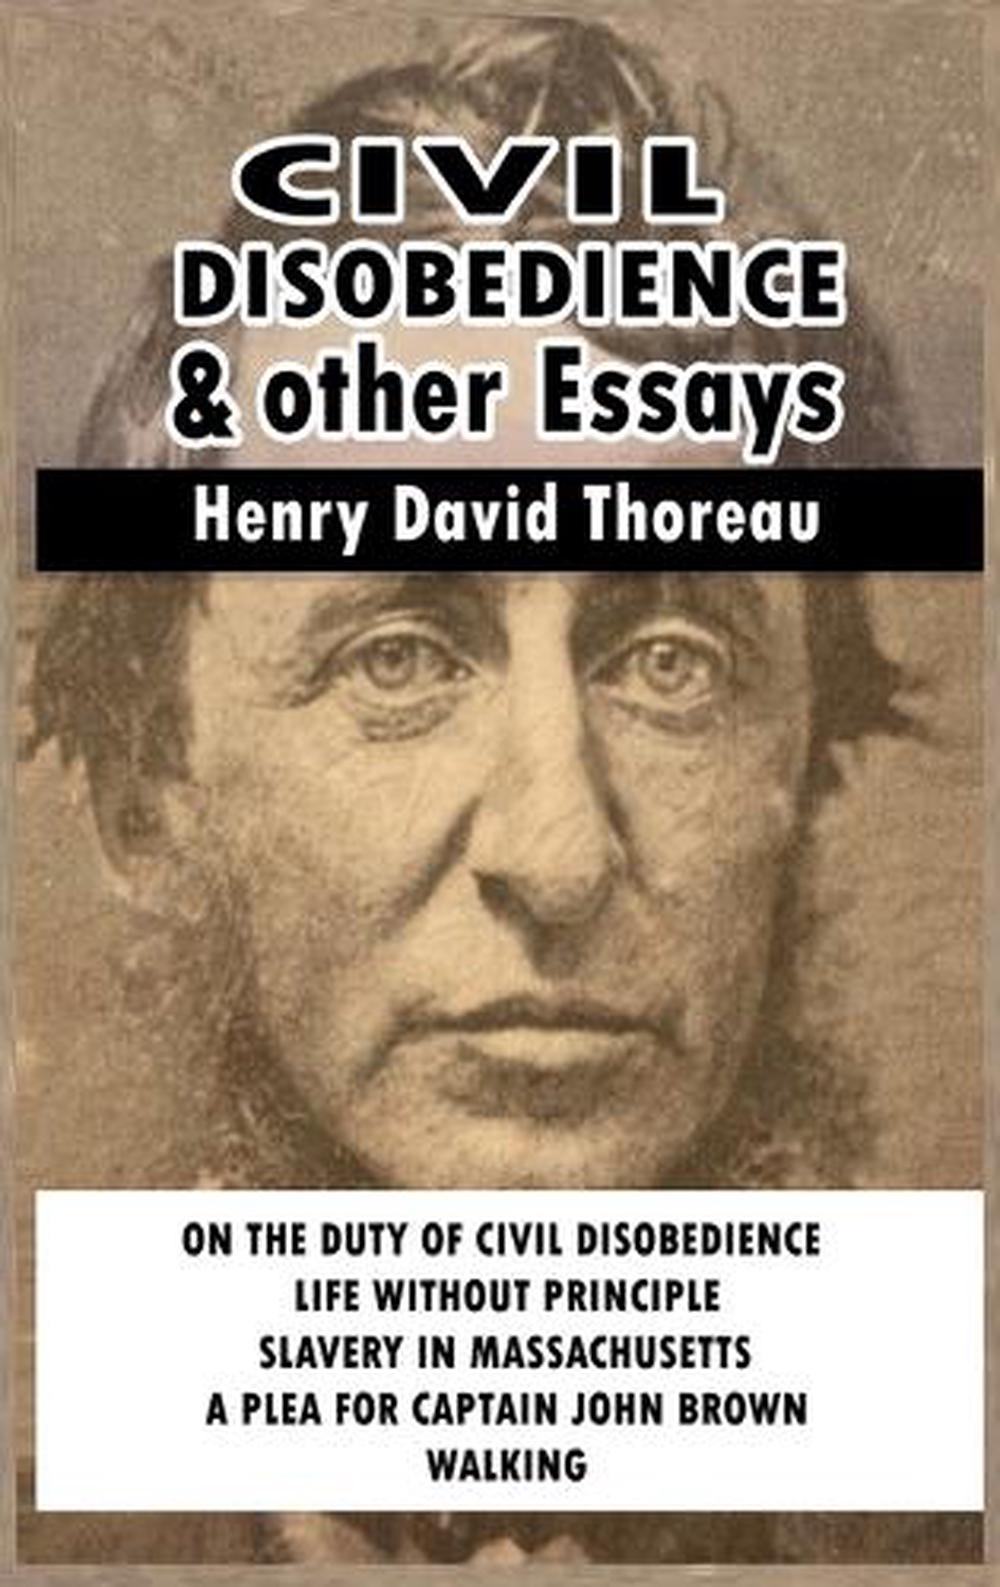 civil disobedience by henry david thoreau thesis